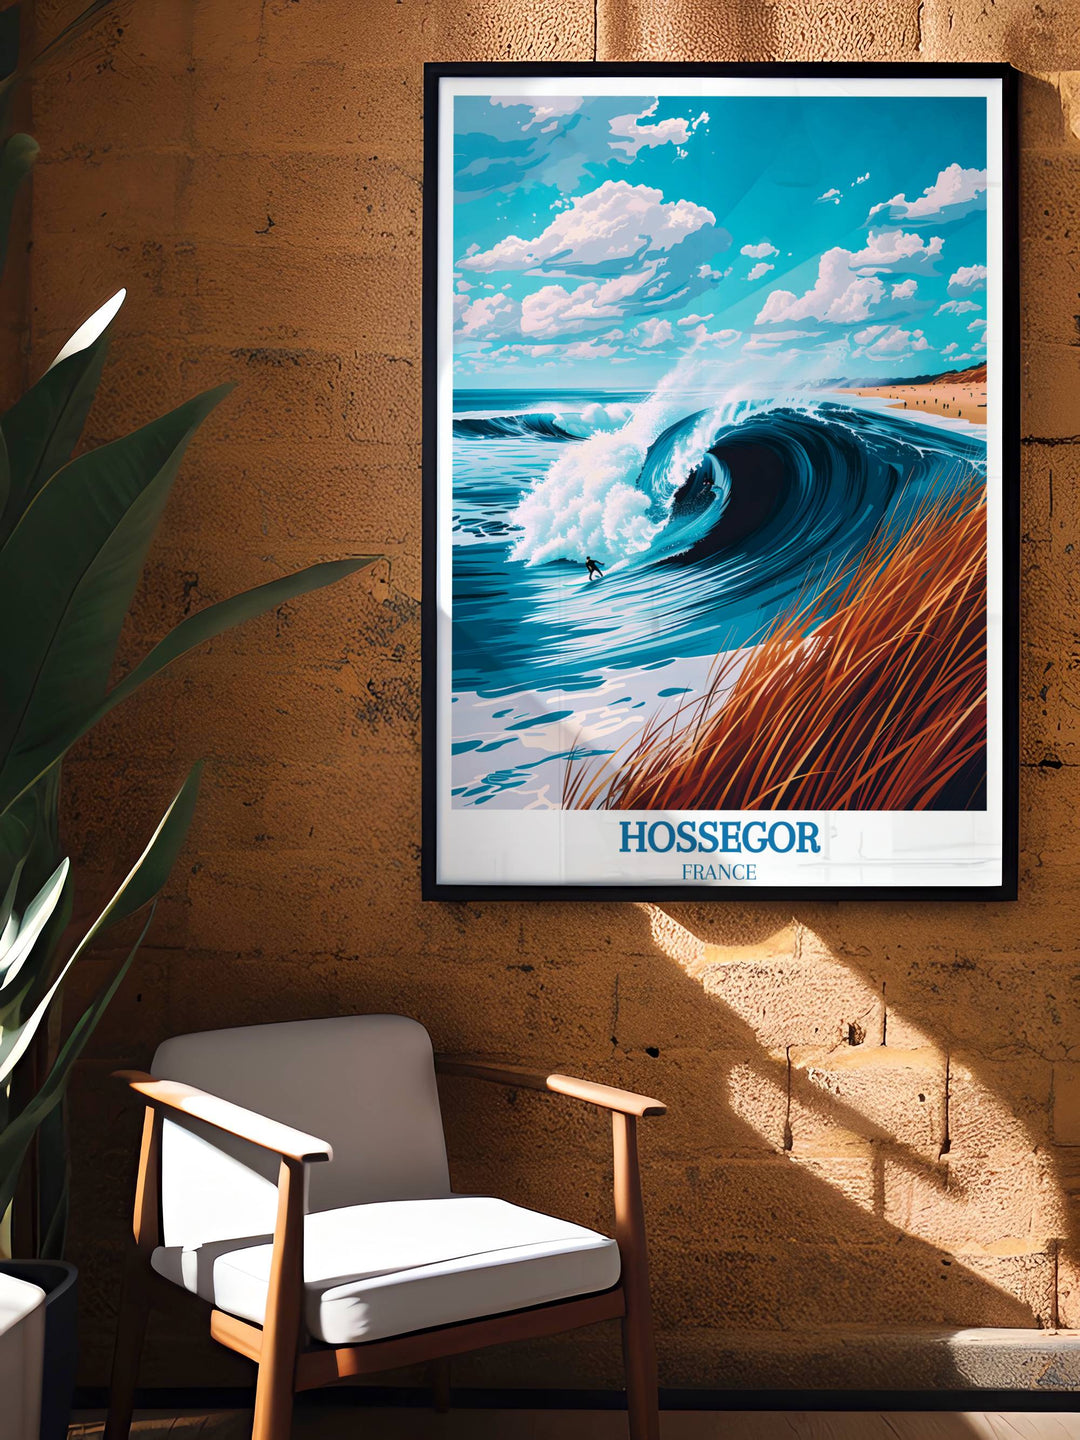 Colorful France Travel Poster showcasing the vibrant sunset over Hossegor beach, perfect for those who appreciate the beauty of coastal landscapes and vibrant skies.